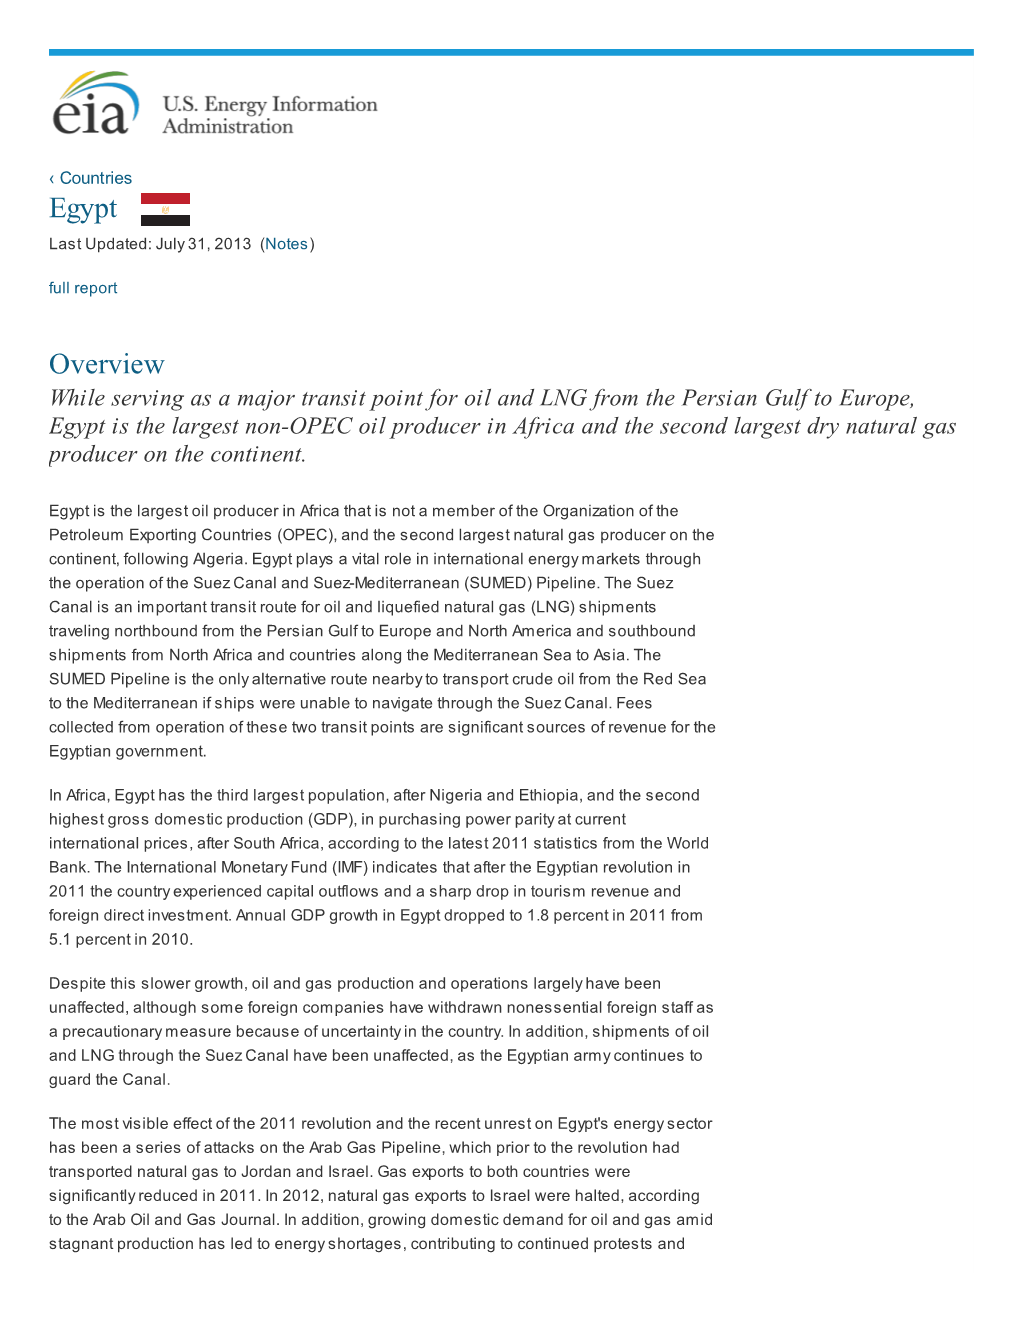 Egypt Overview